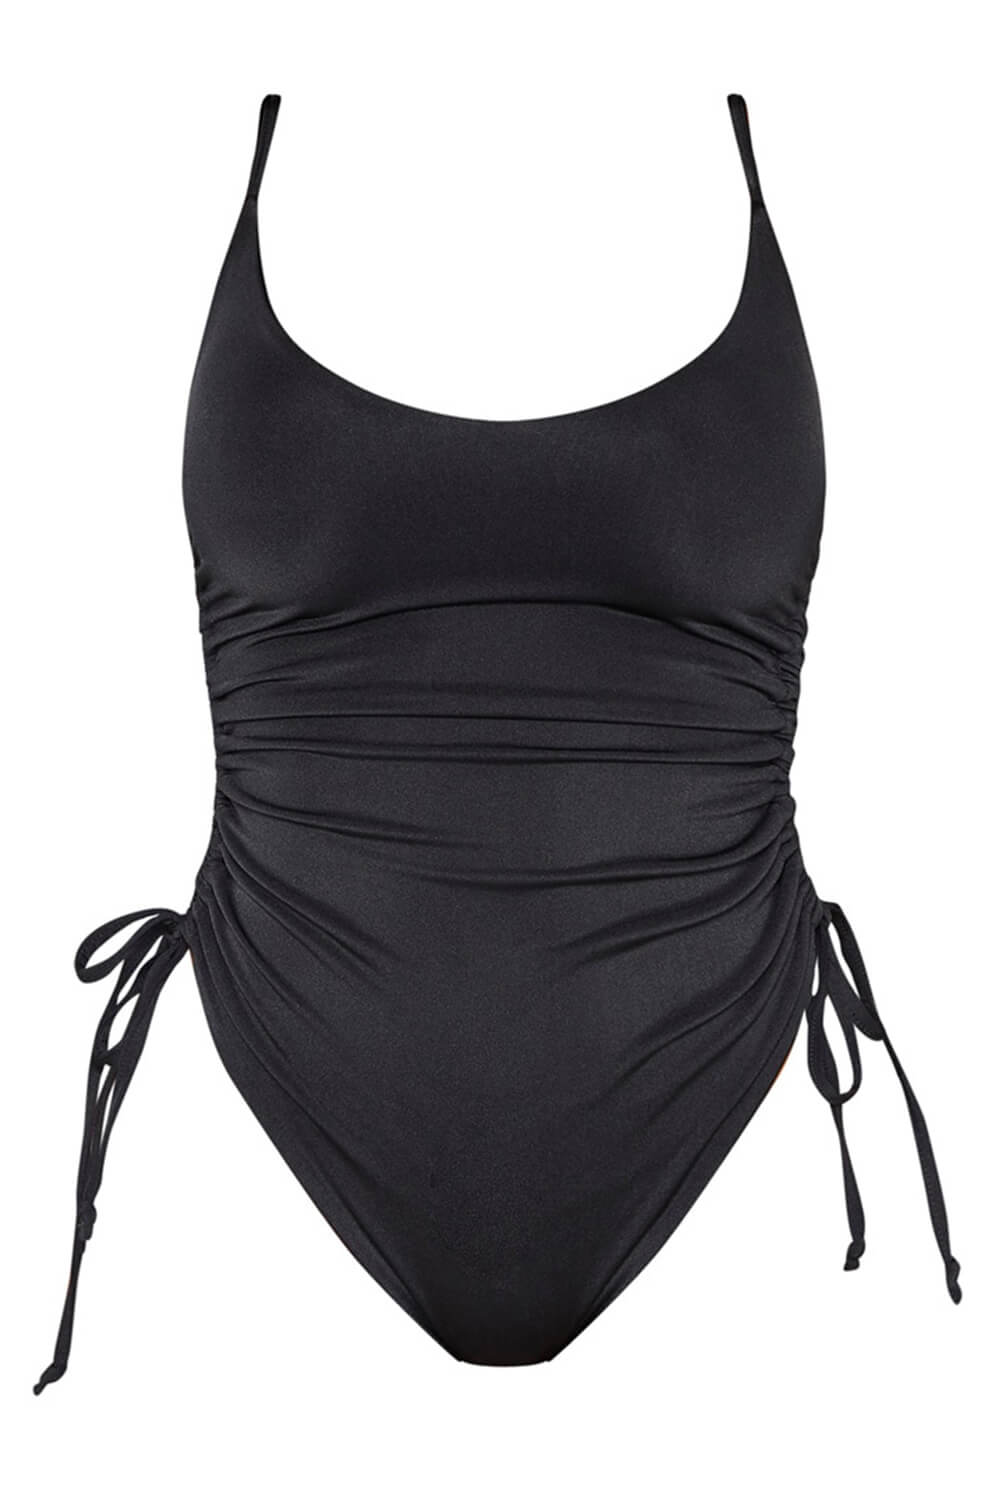 Black High Rise Ruched Side Brazilian One Piece Swimsuit